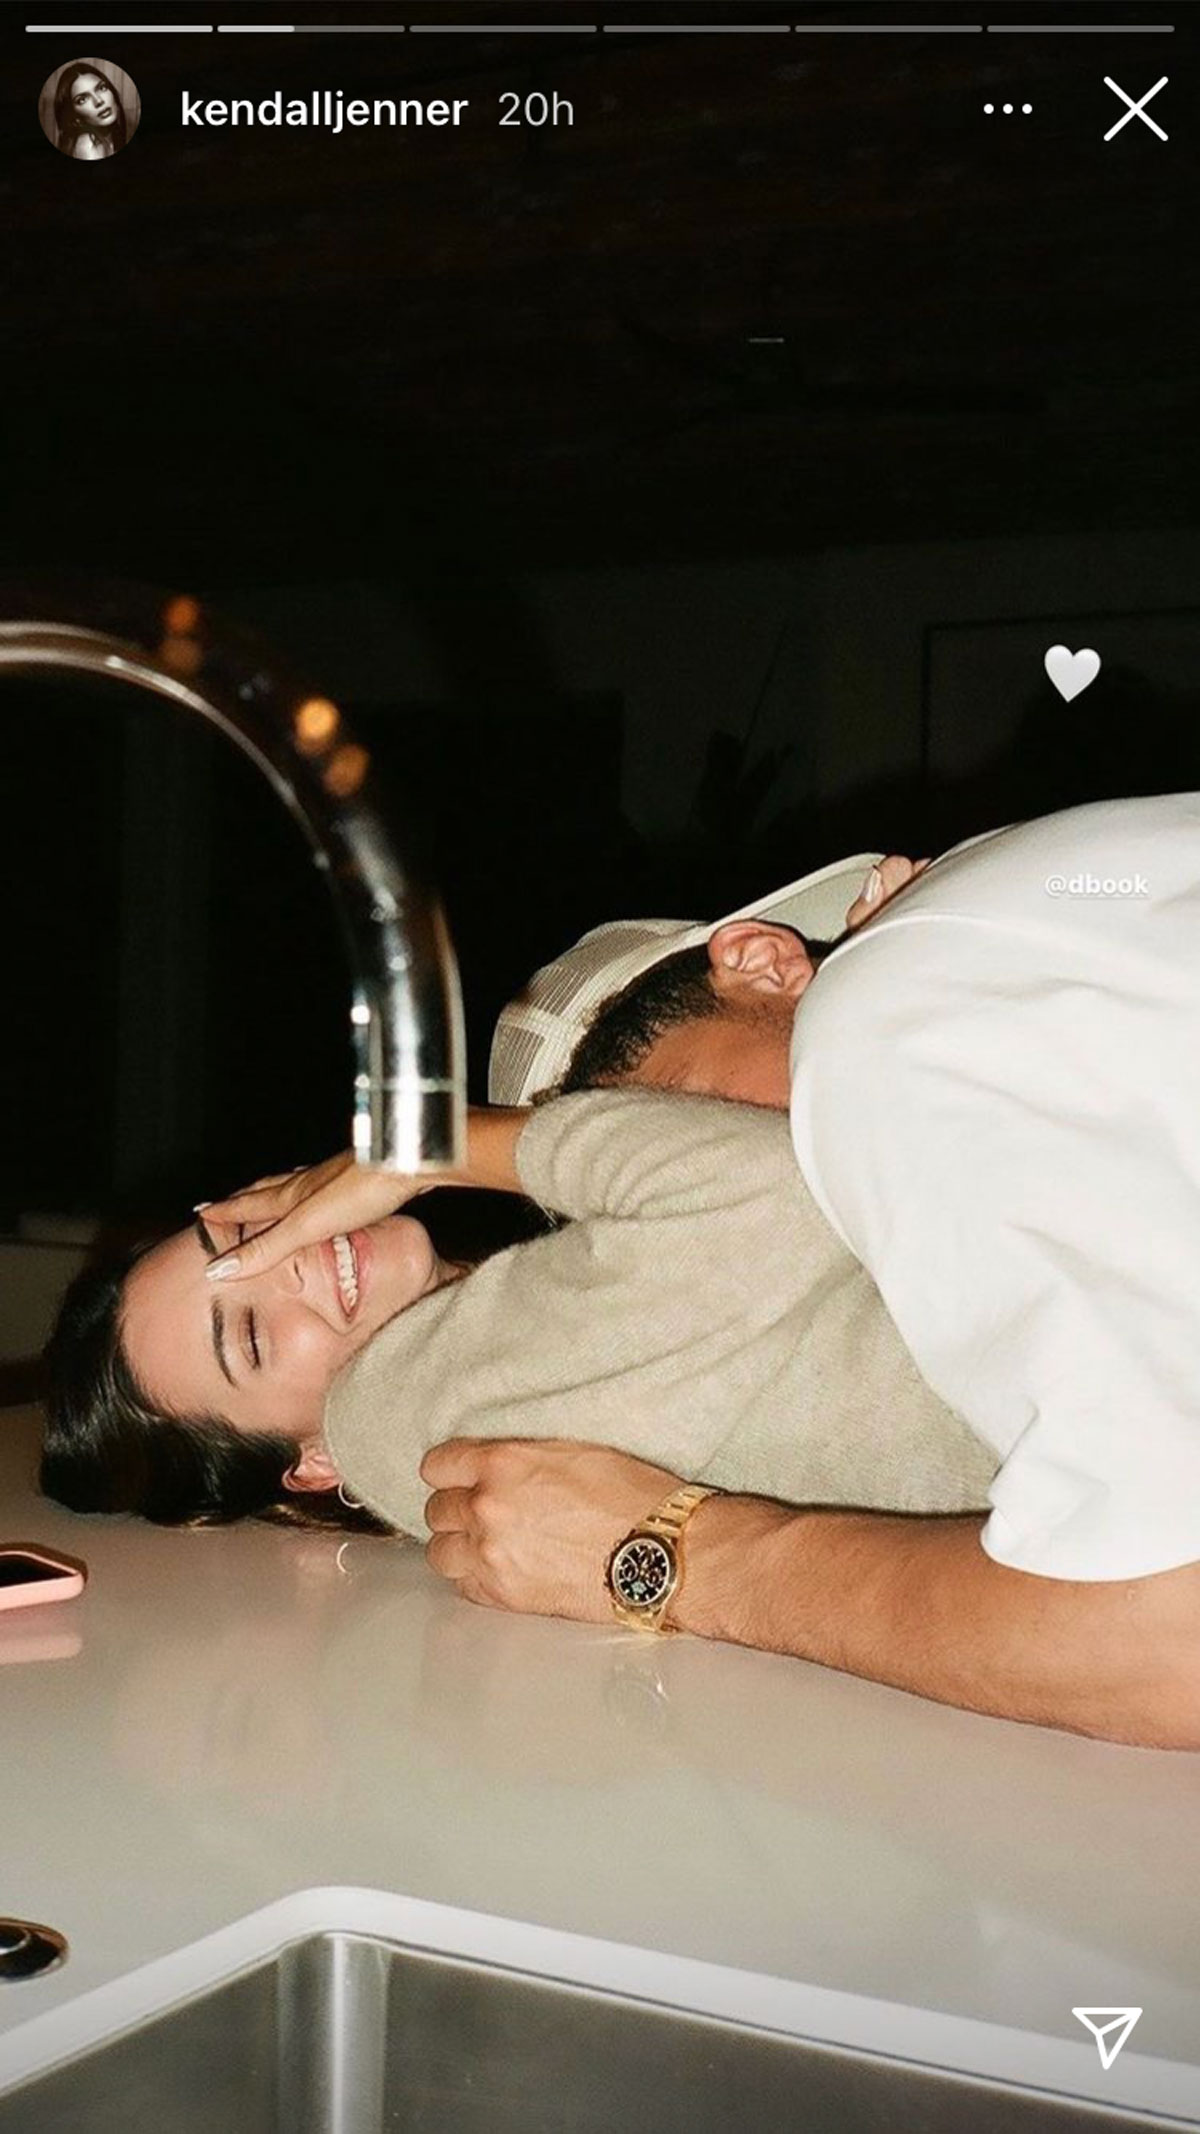 Kendall Jenner and Devin Booker have made things Instagram official!